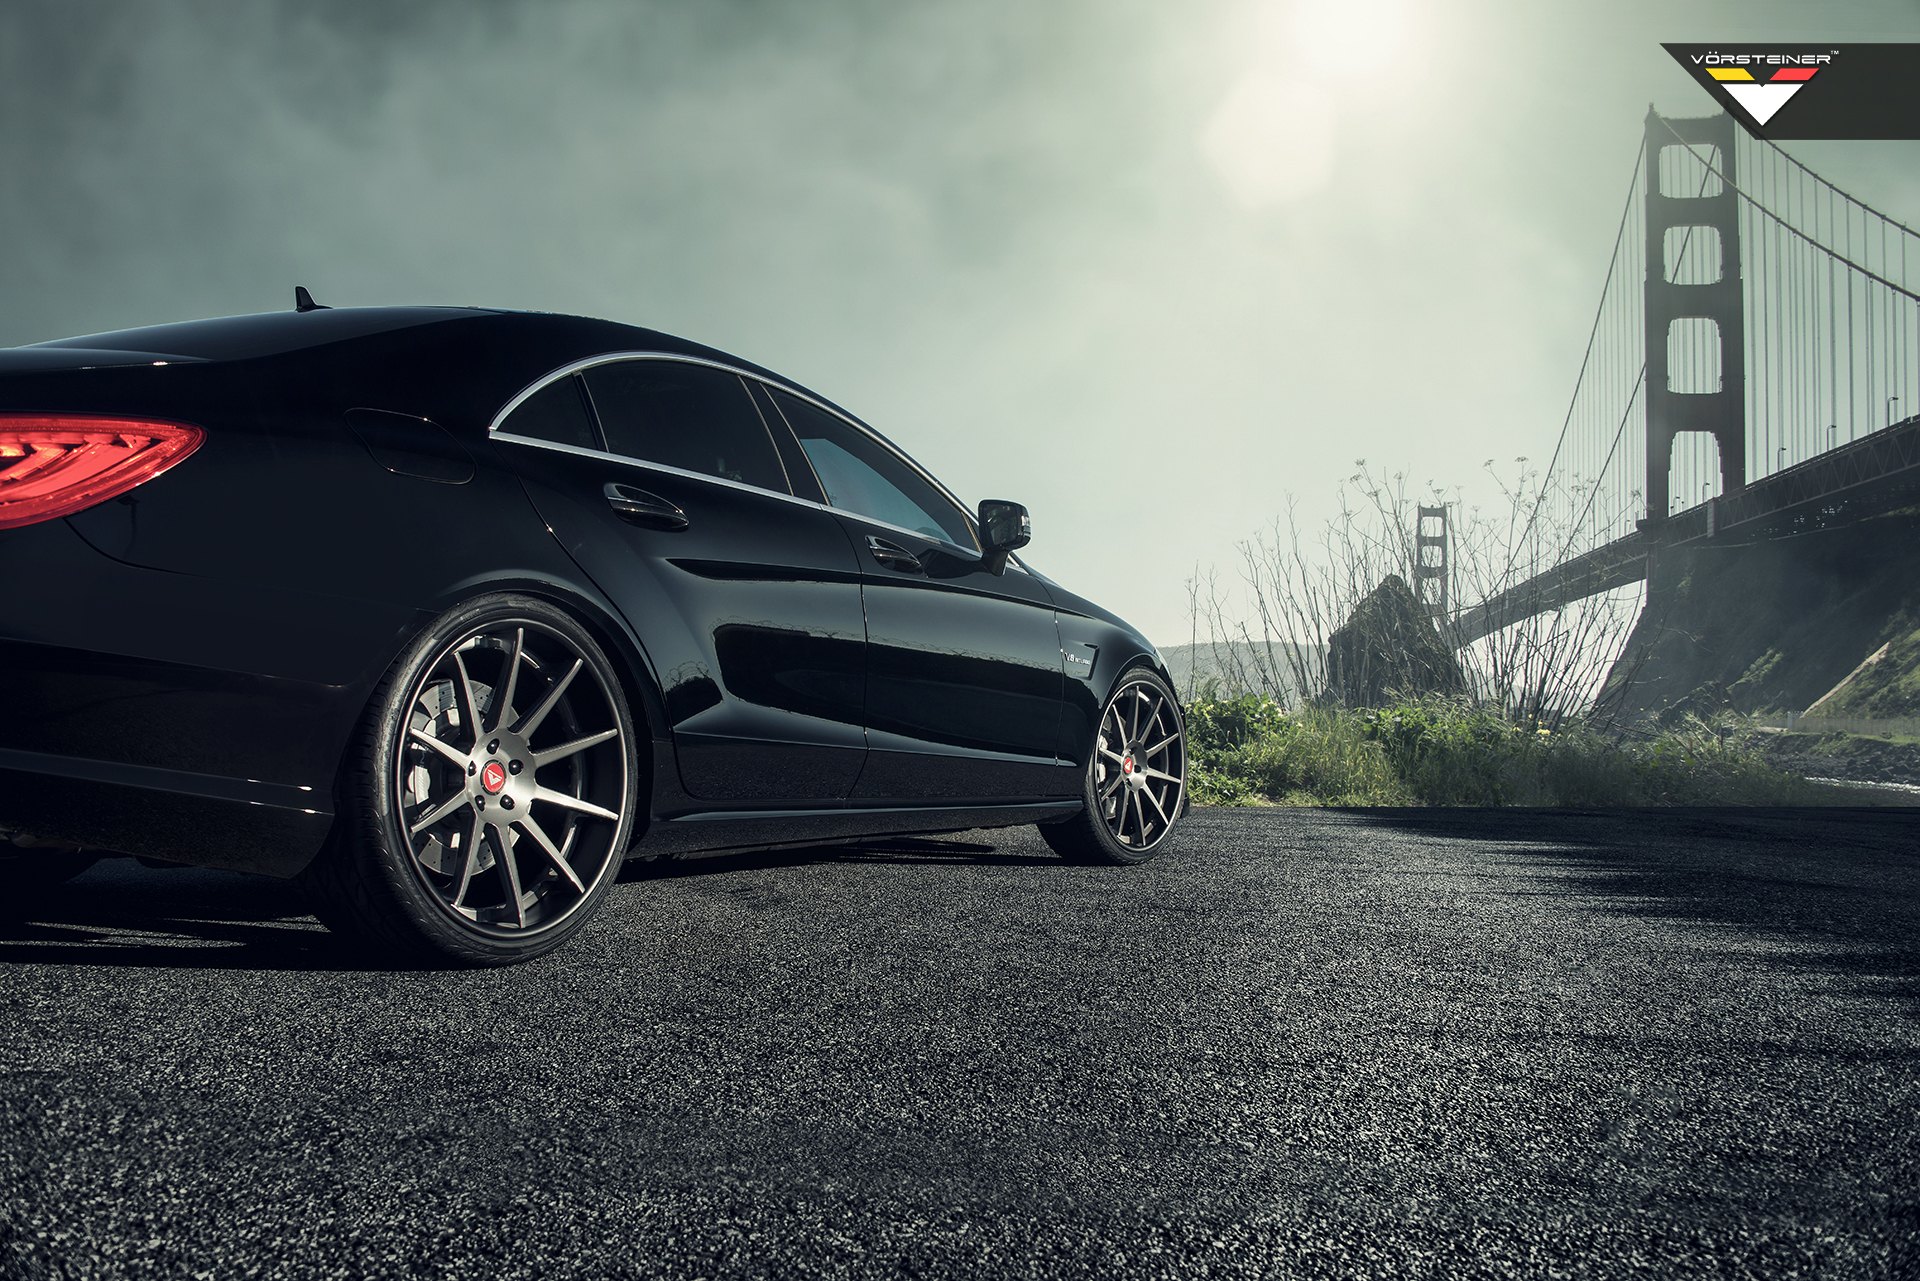 Black Mercedes CLS Class with Red LED Taillights - Photo by Vorstiner